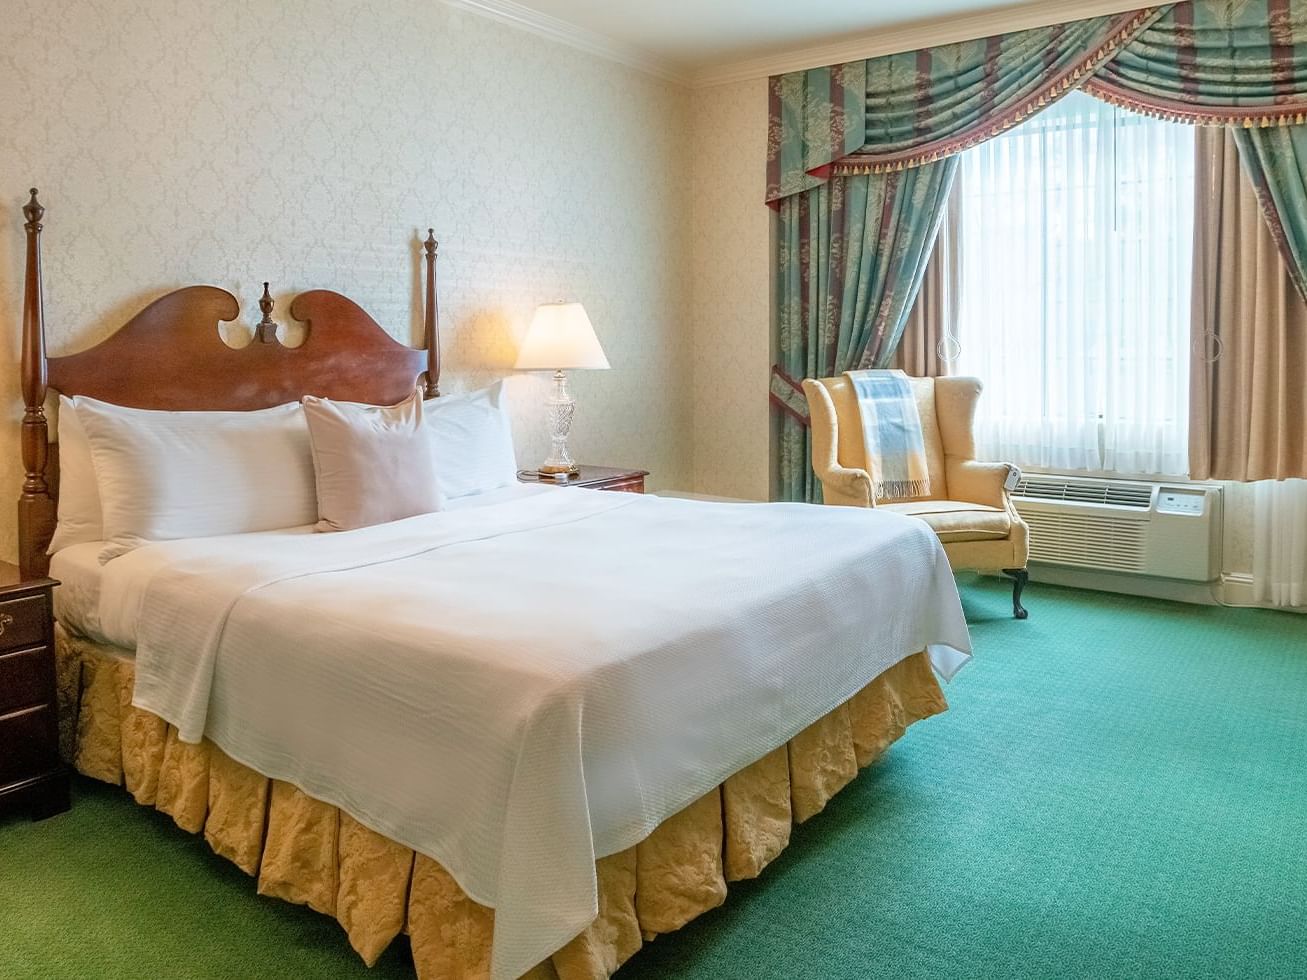 Bristol Boutique Hotel - ADA Compliant room with King bed, nightstands, cozy chair and large draped window